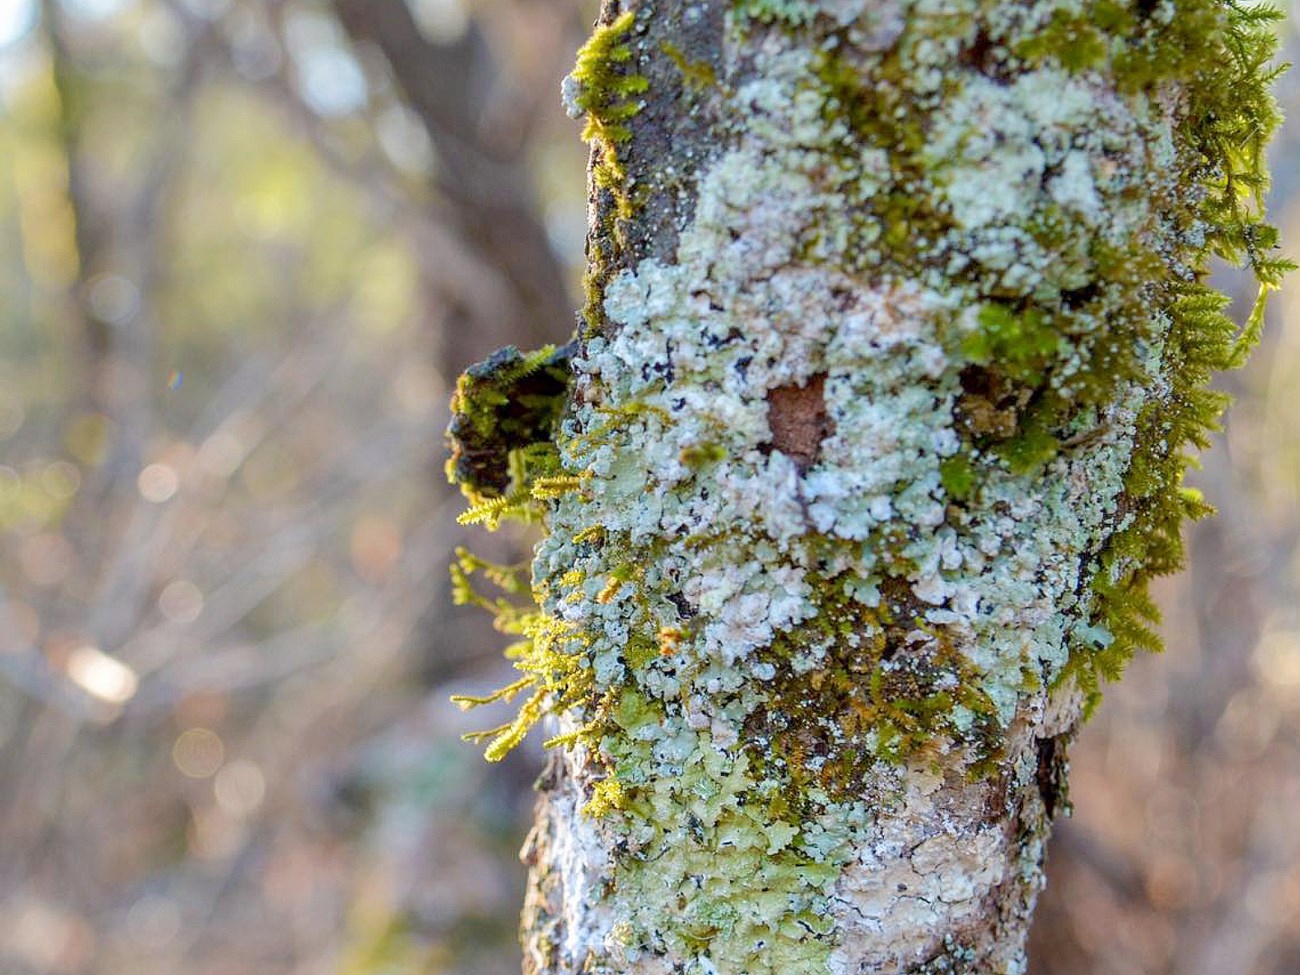 Colorful lichens on a tree trunk